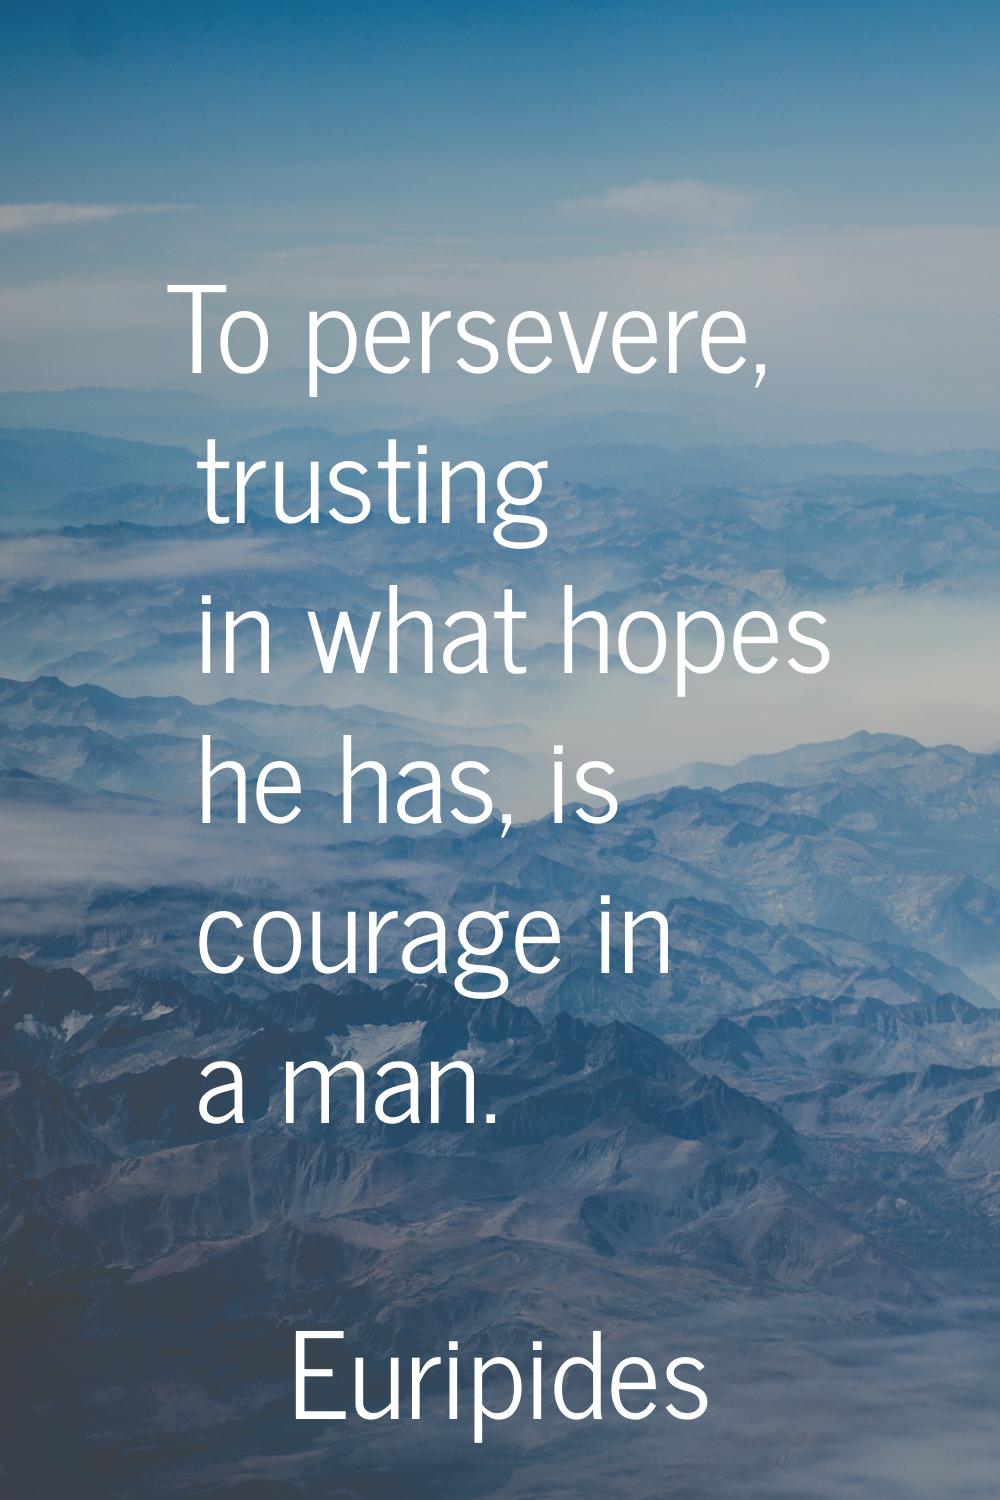 To persevere, trusting in what hopes he has, is courage in a man.